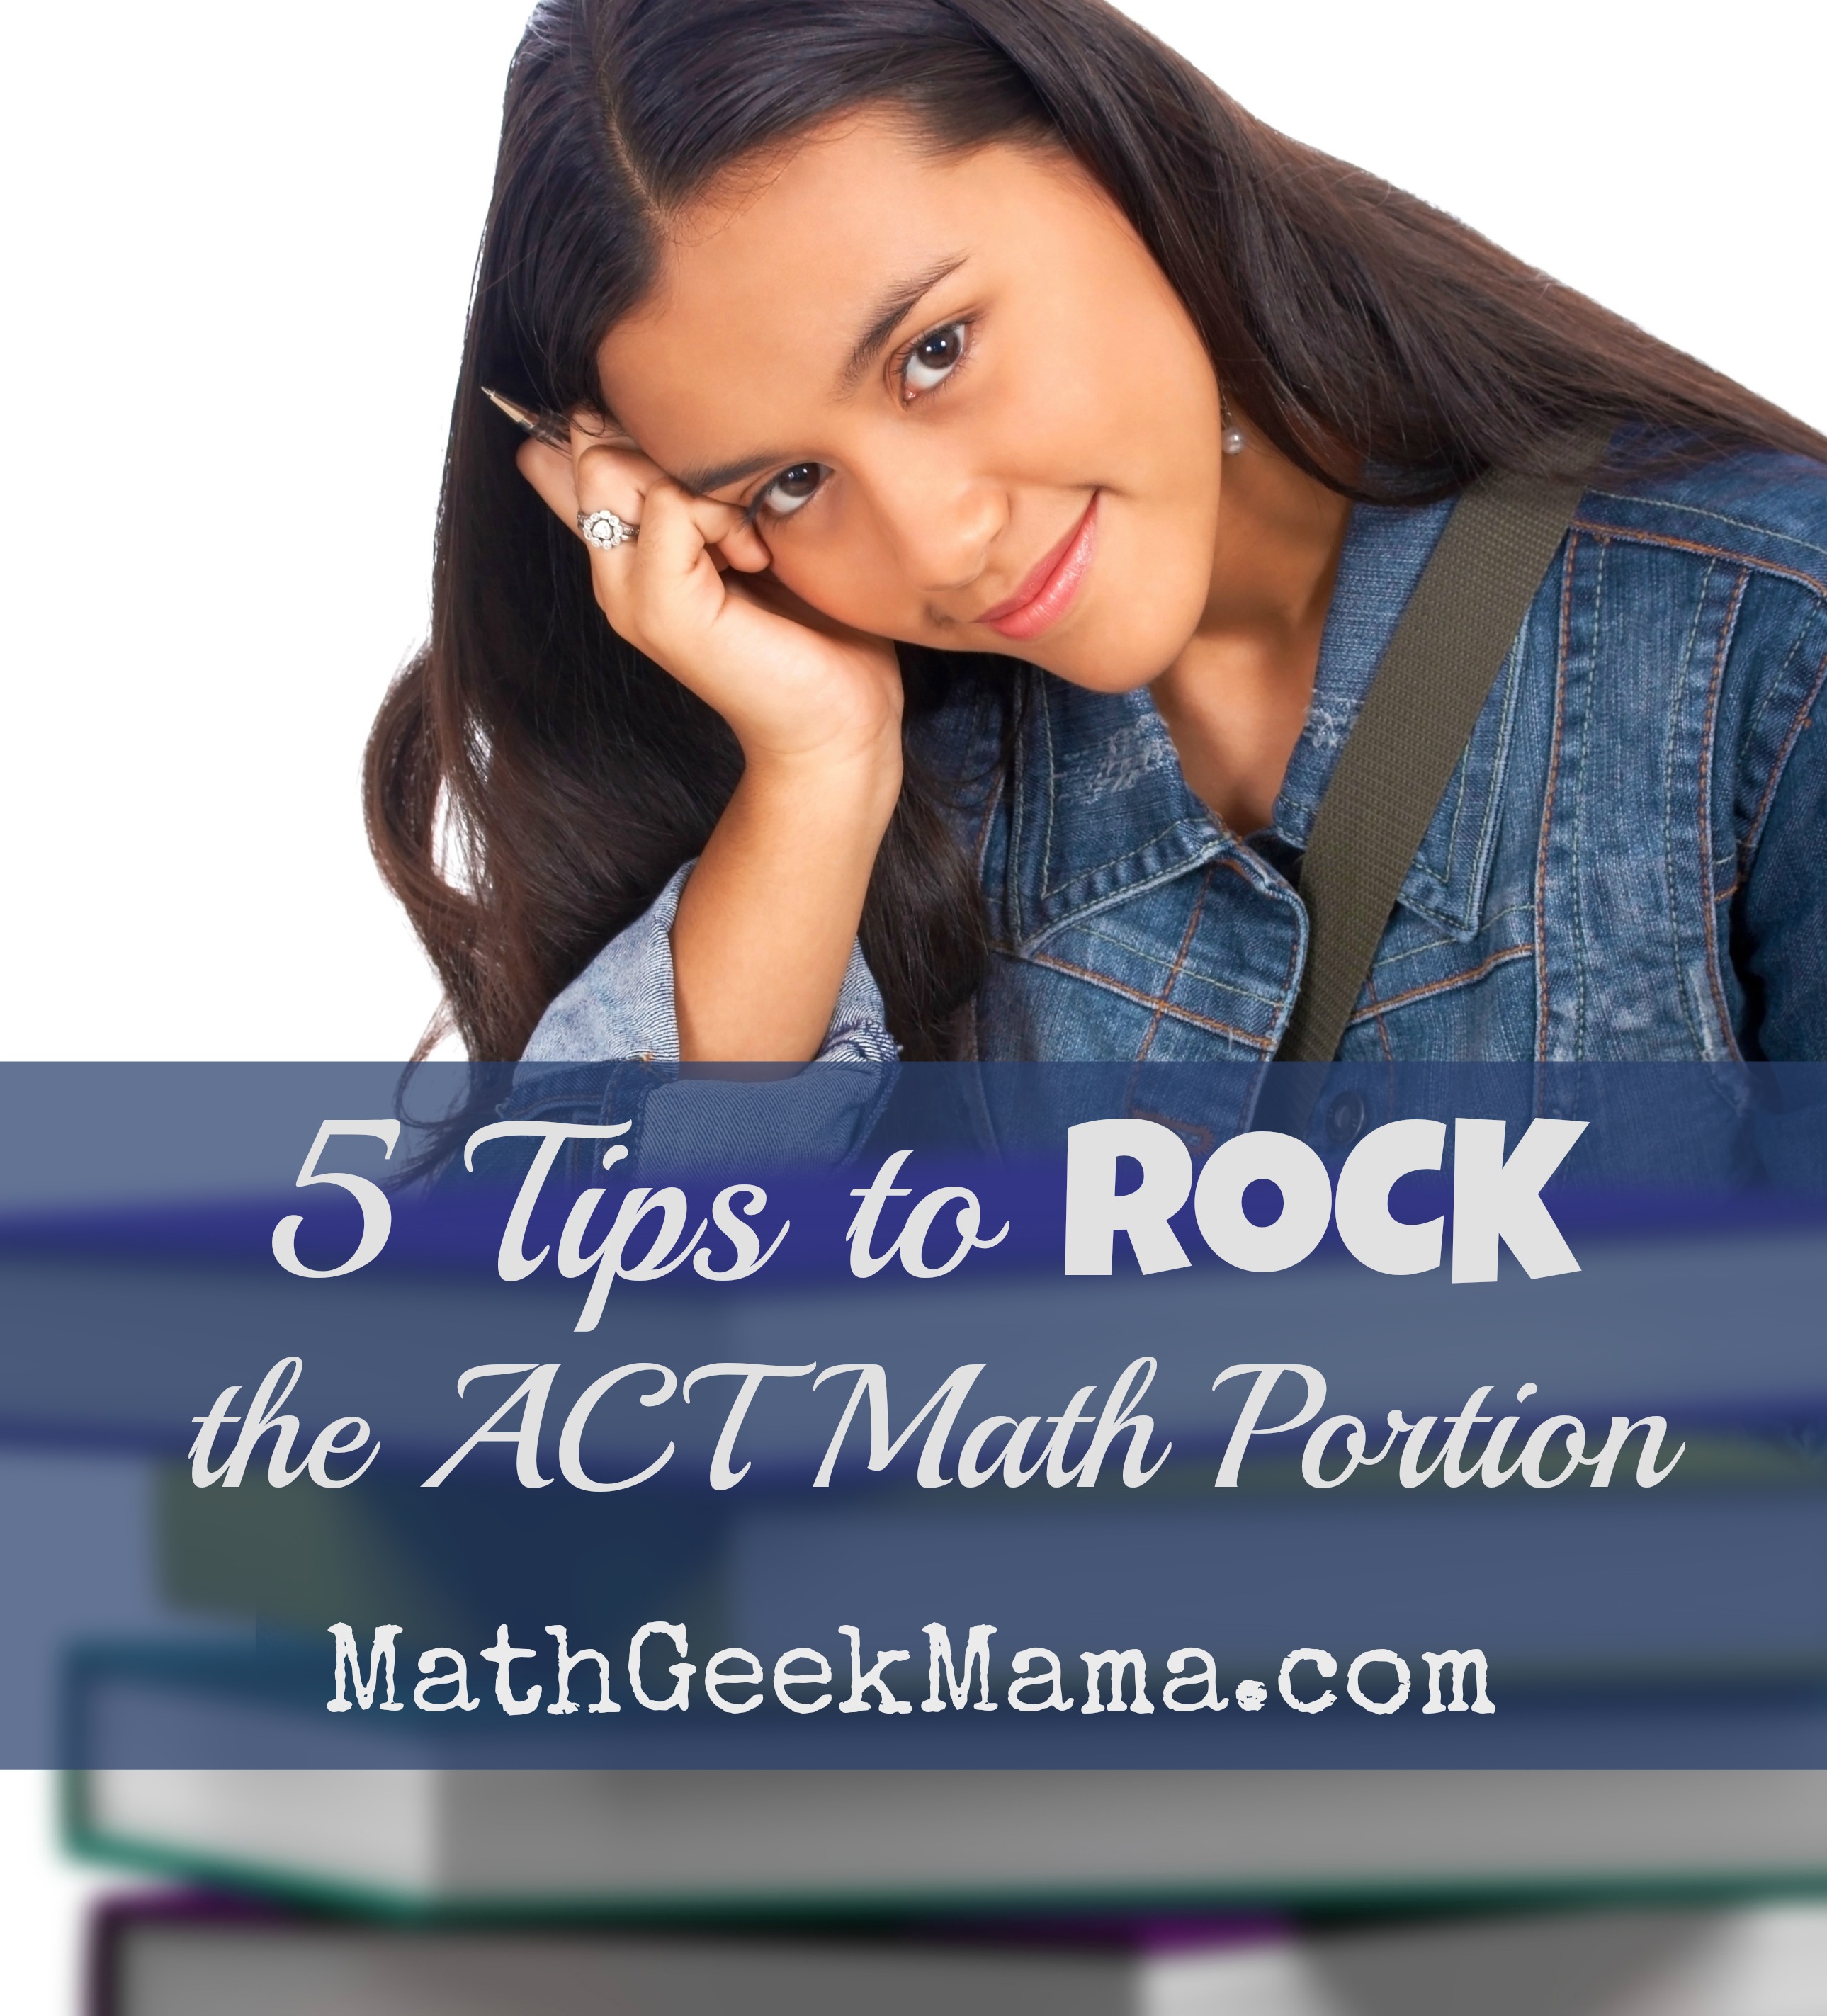 Fantastic list of tips to succeed at ACT or SAT math! These resources will set your kids up for success!